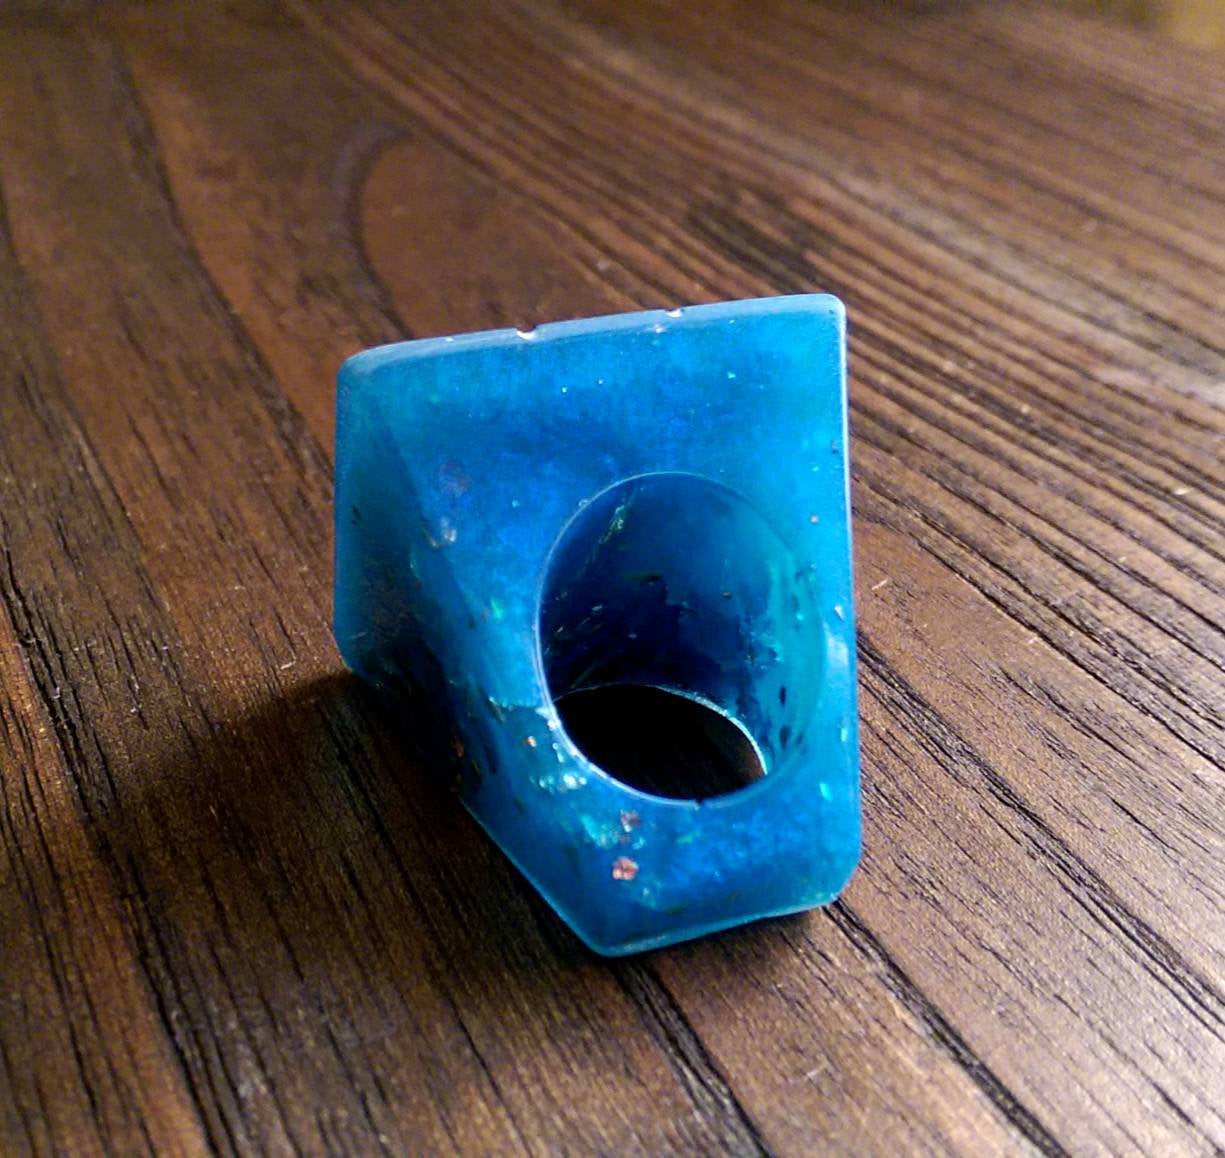 Statement Square Resin Ring, Handmade Size 7 US N AU Blue Silver Gold Rose Gold Leaf Ring